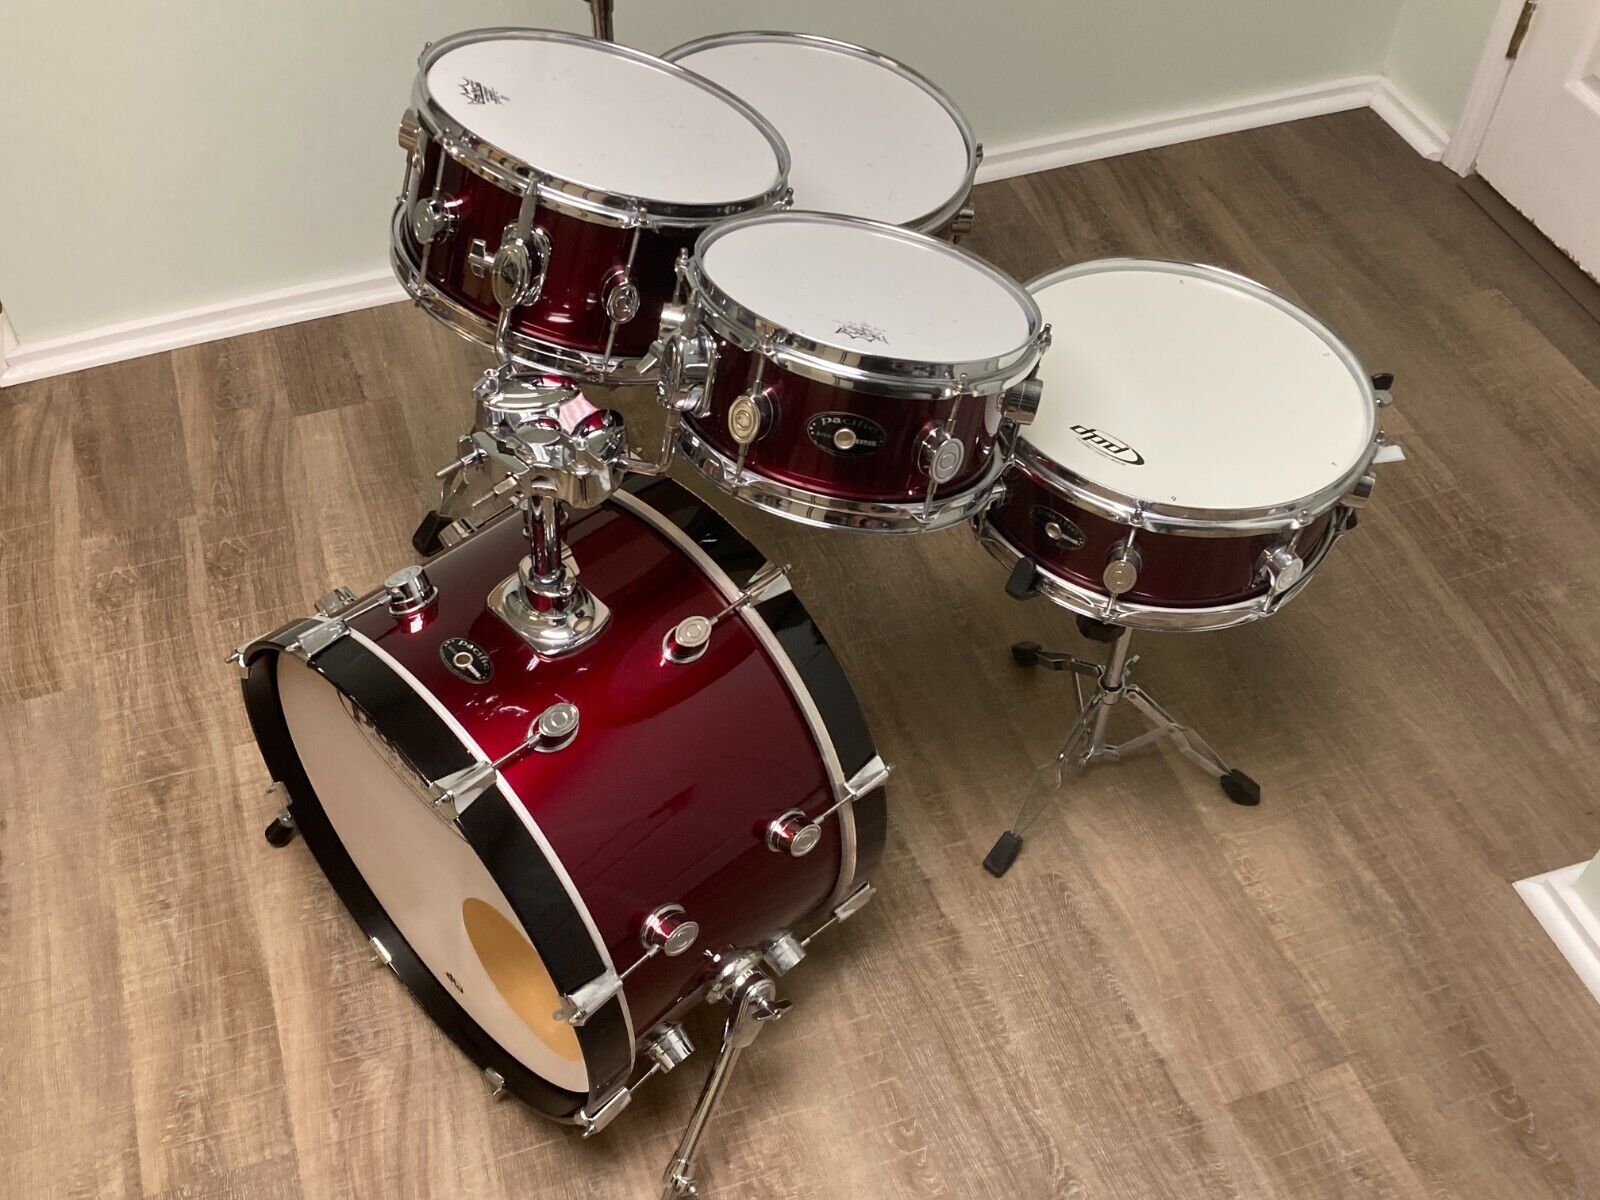 PDP by DW Pacific Chameleon Compact Travel Drum Set 2000s – Wine Red 19